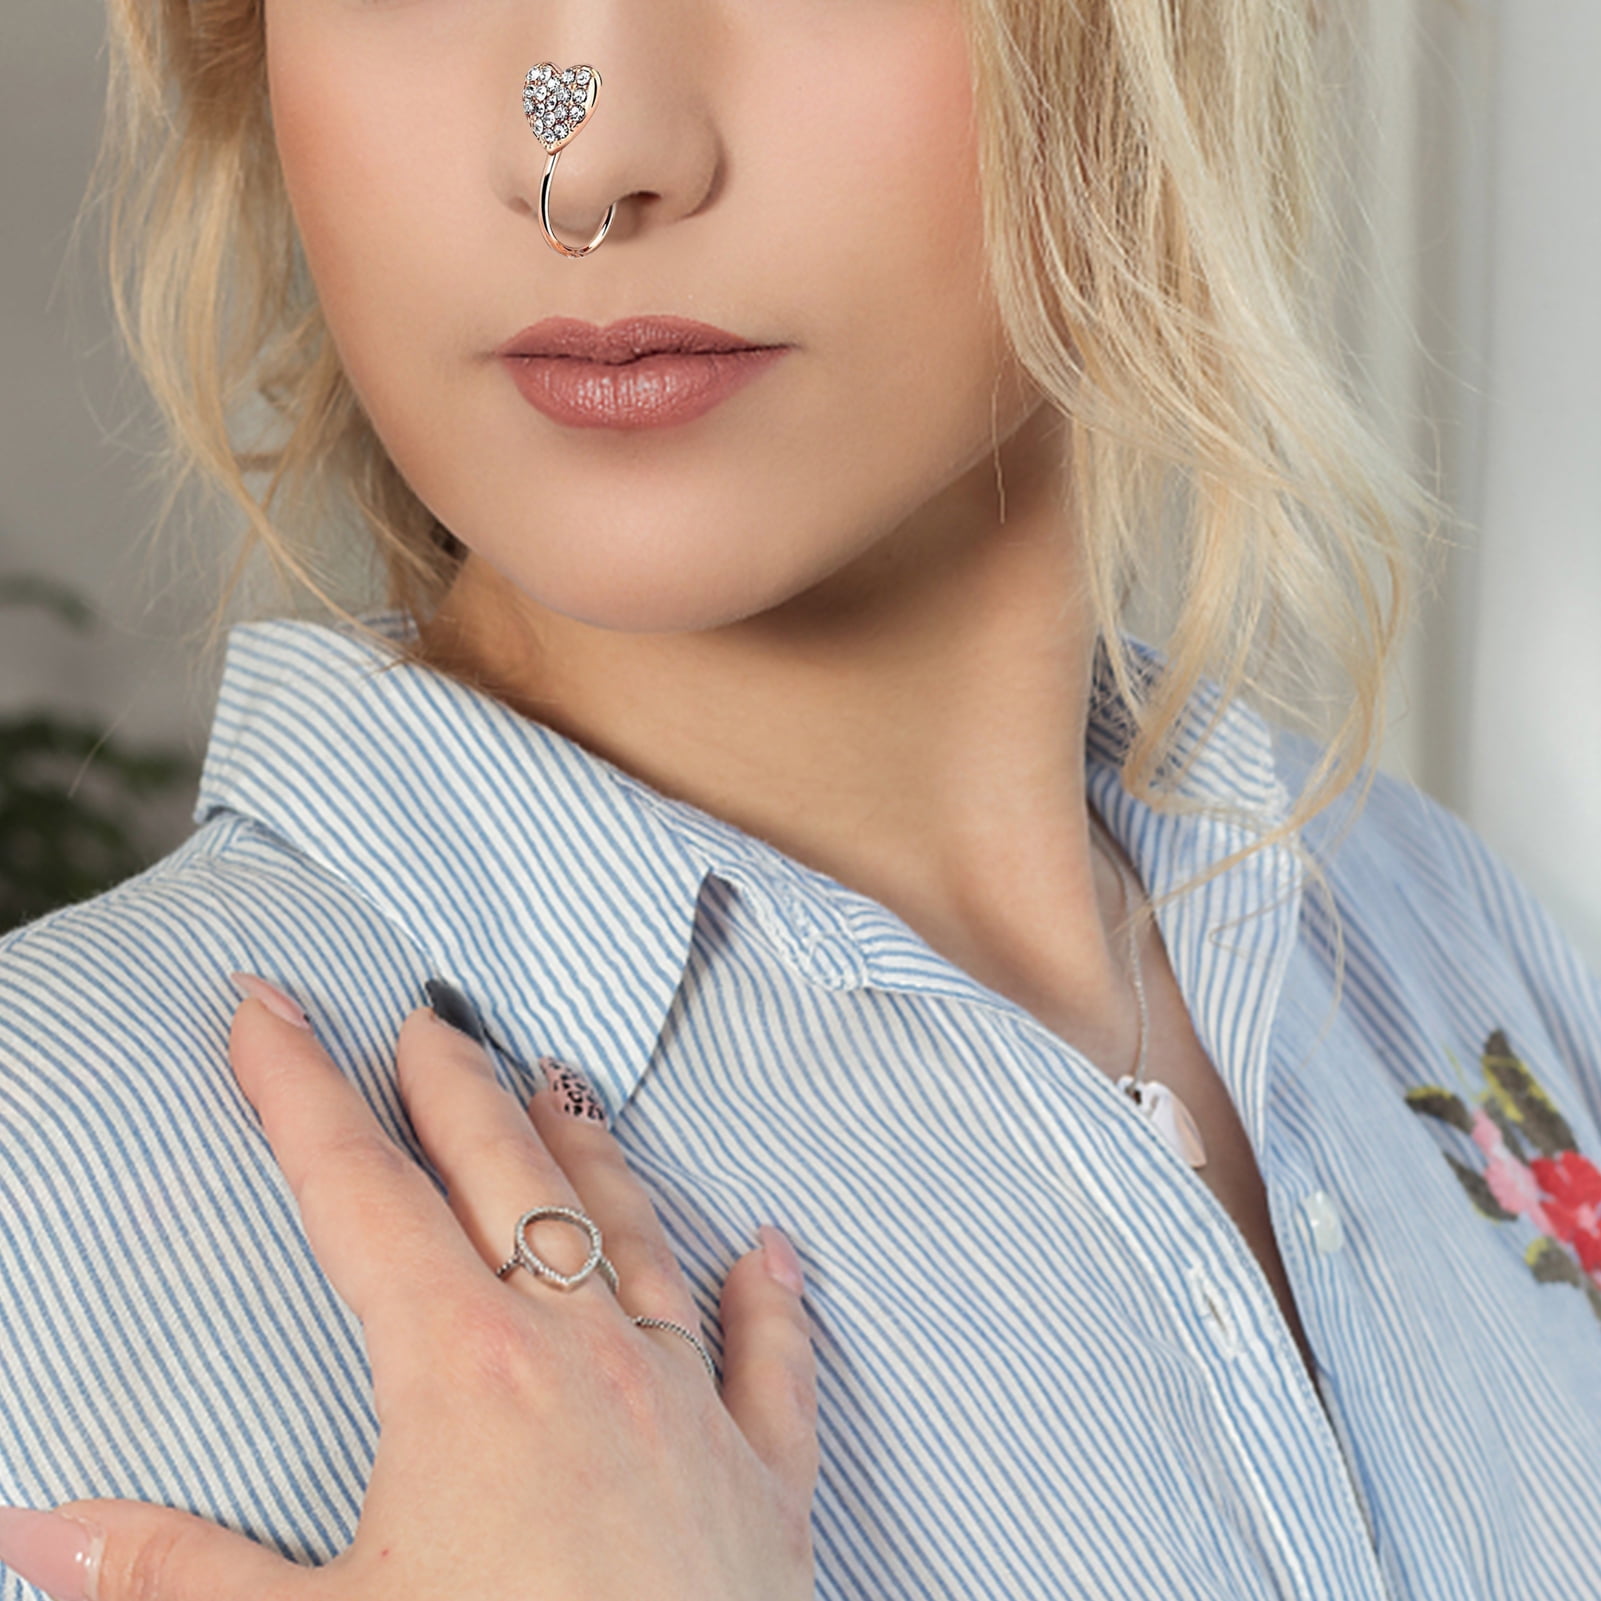 Amazon.com: Vintage Style Rose Top Nose Ring L Shape Piercing Jewelry 20  Gauge (Gold-Tone Steel) : Clothing, Shoes & Jewelry